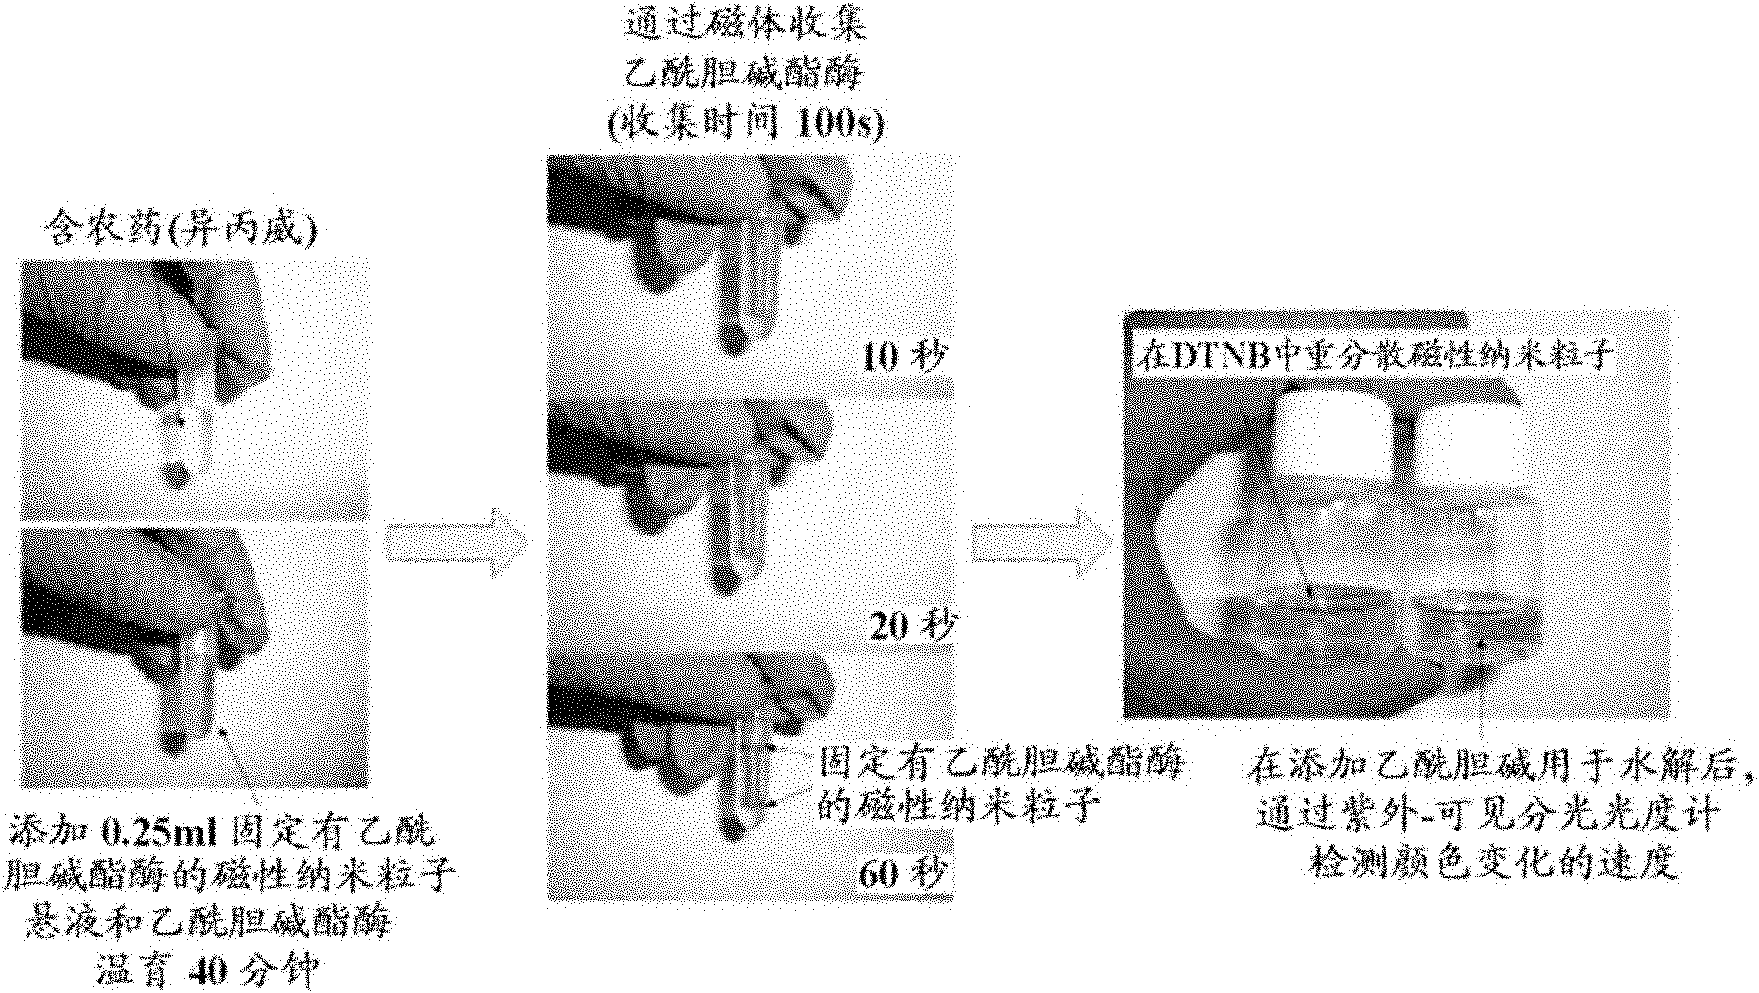 Method and device for detecting pesticide